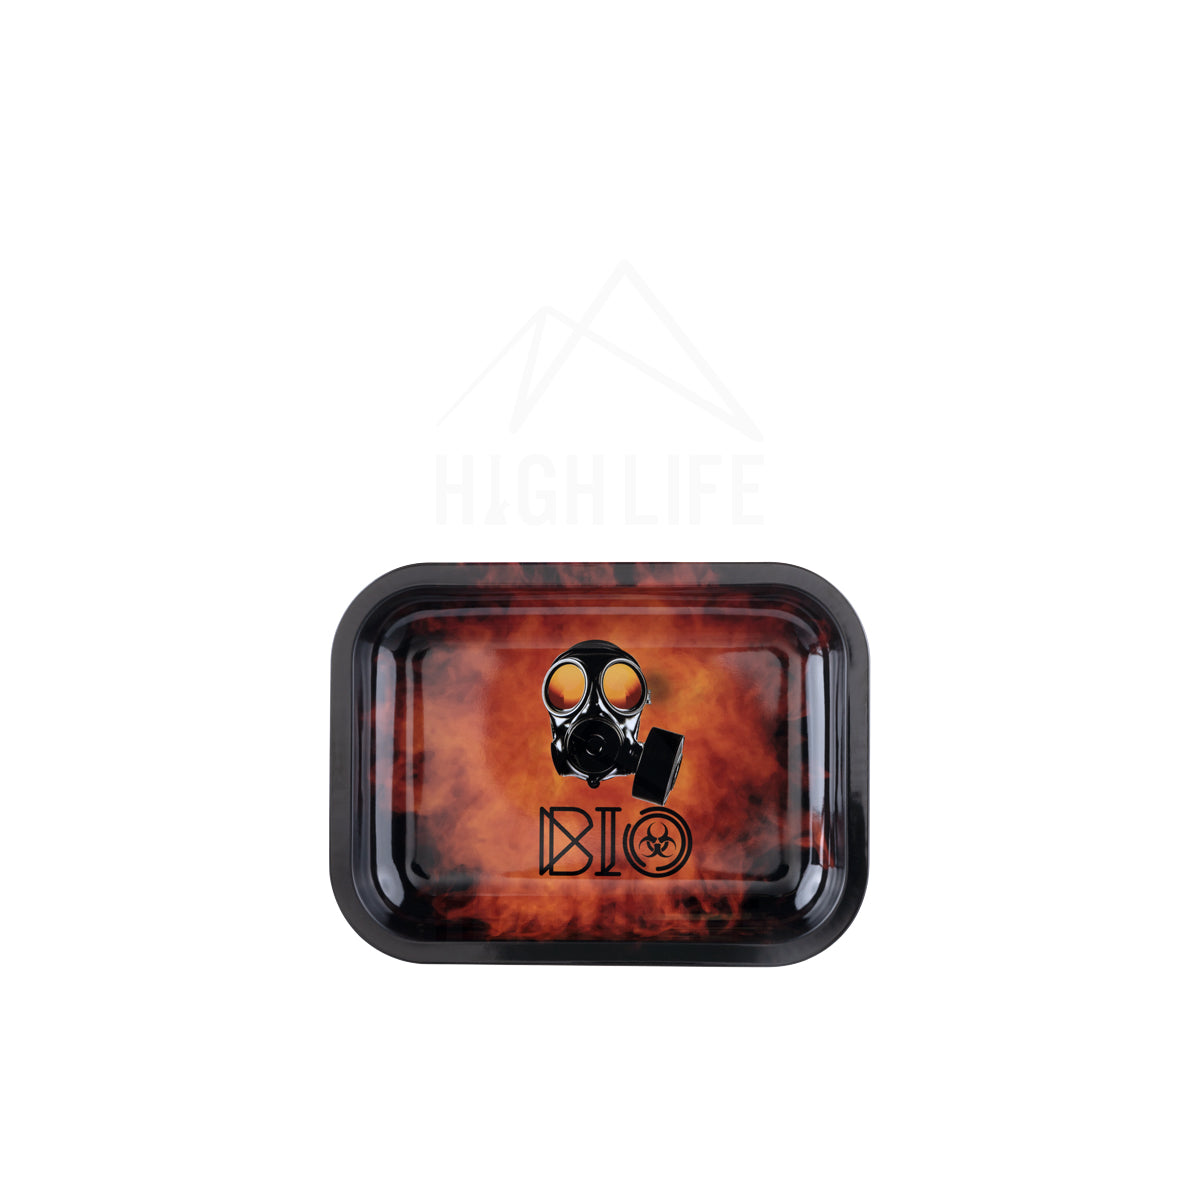 BIO Glass 'Red Gas Mask' Rolling Tray - 7.5" x 5.5" - weed accessories